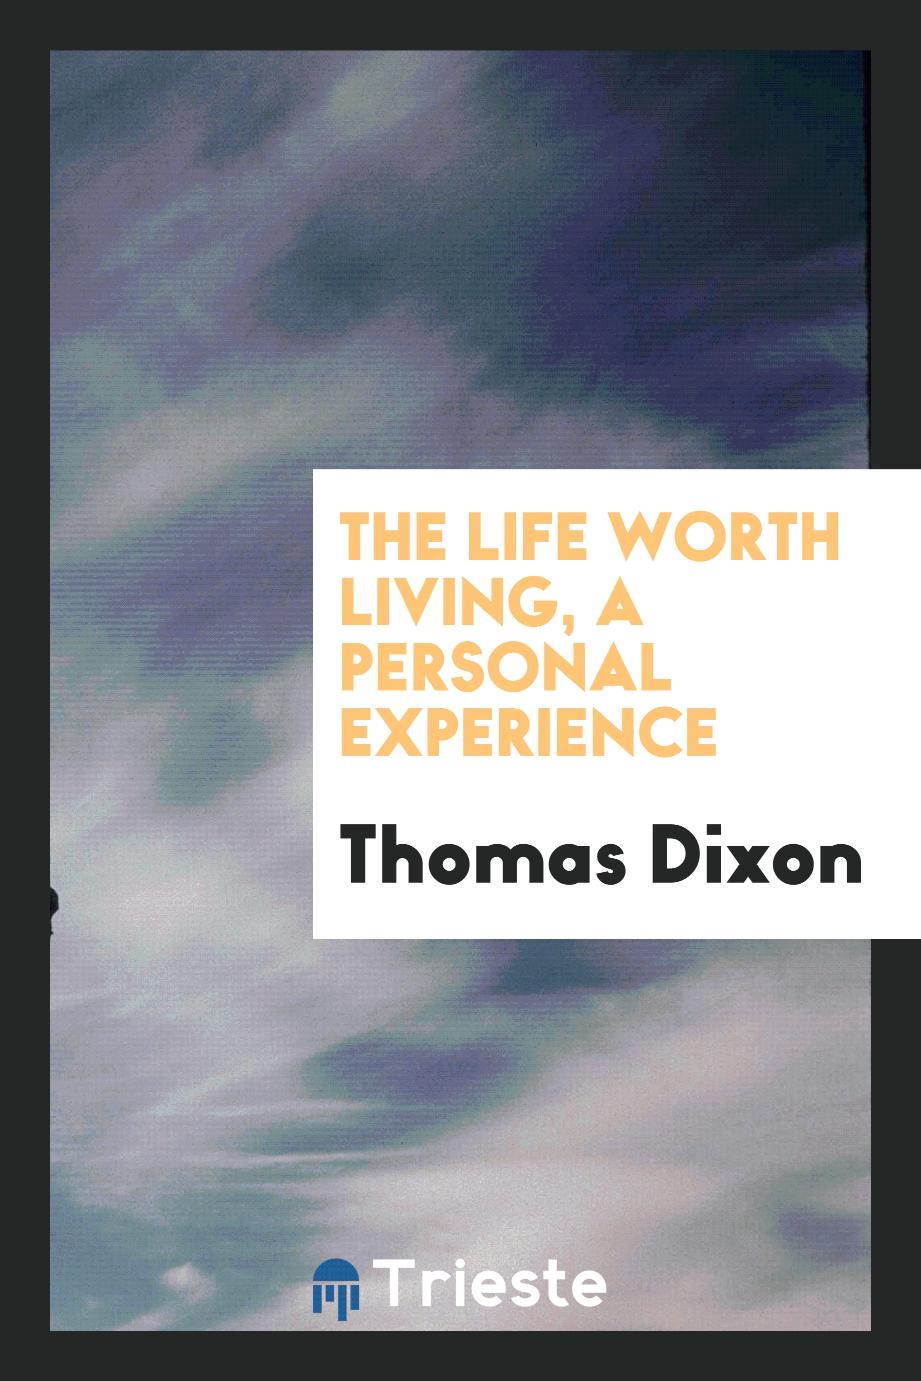 The life worth living, a personal experience